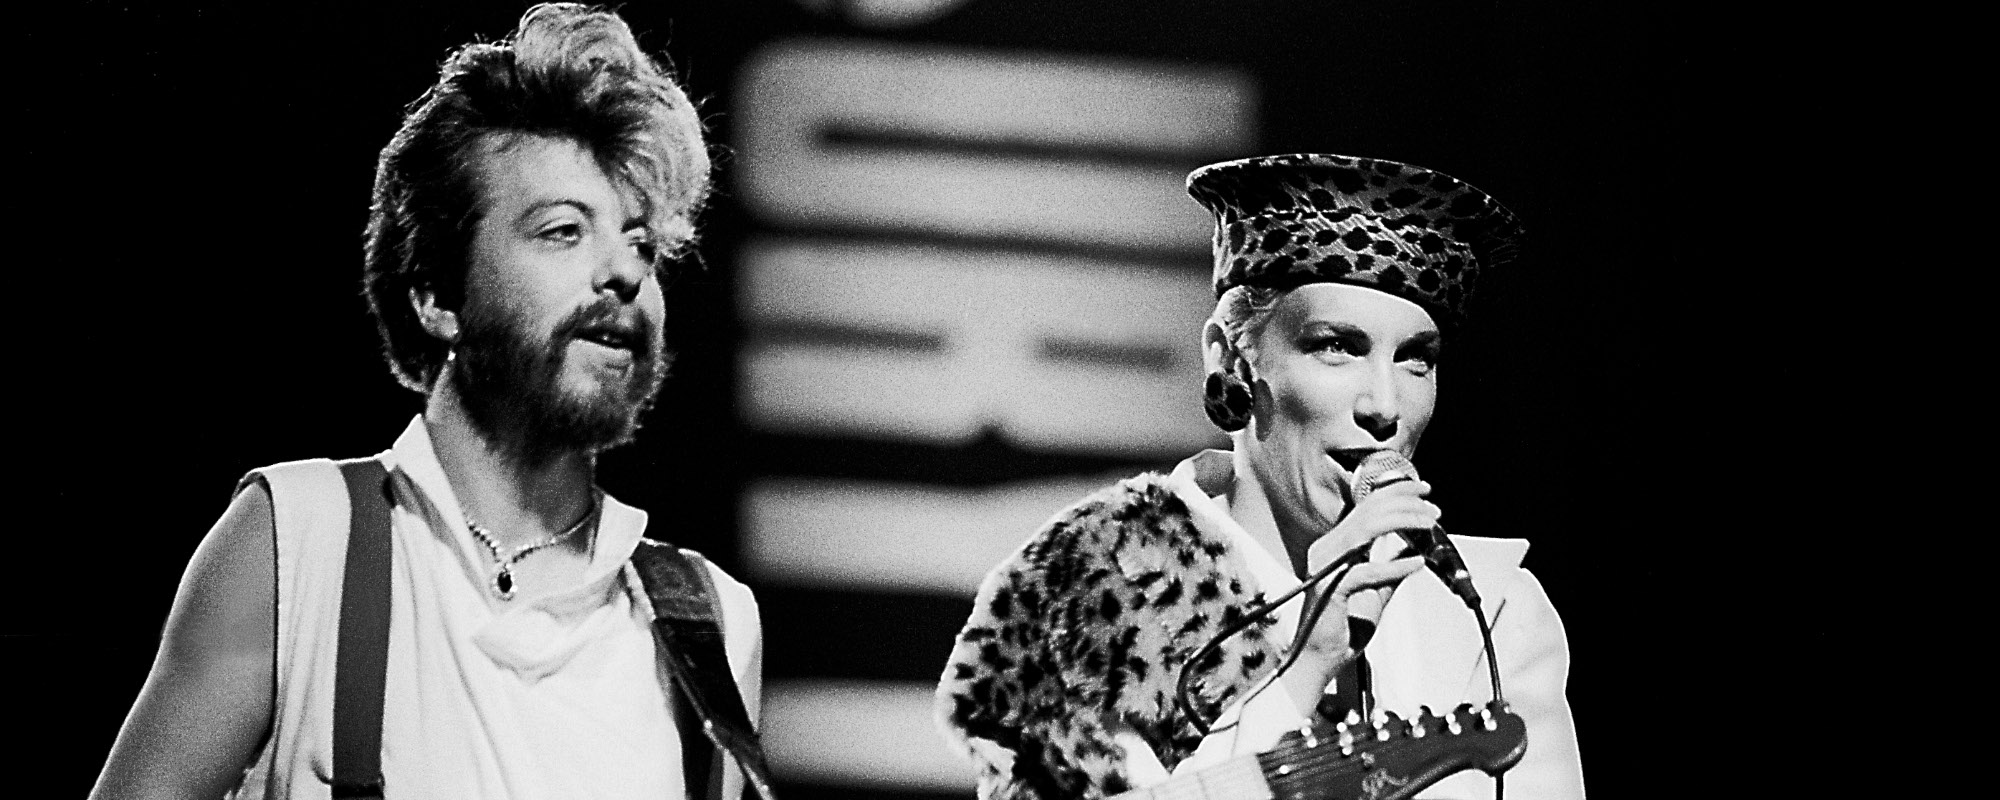 Top 10 Songs From Eurythmics That You Should Revisit